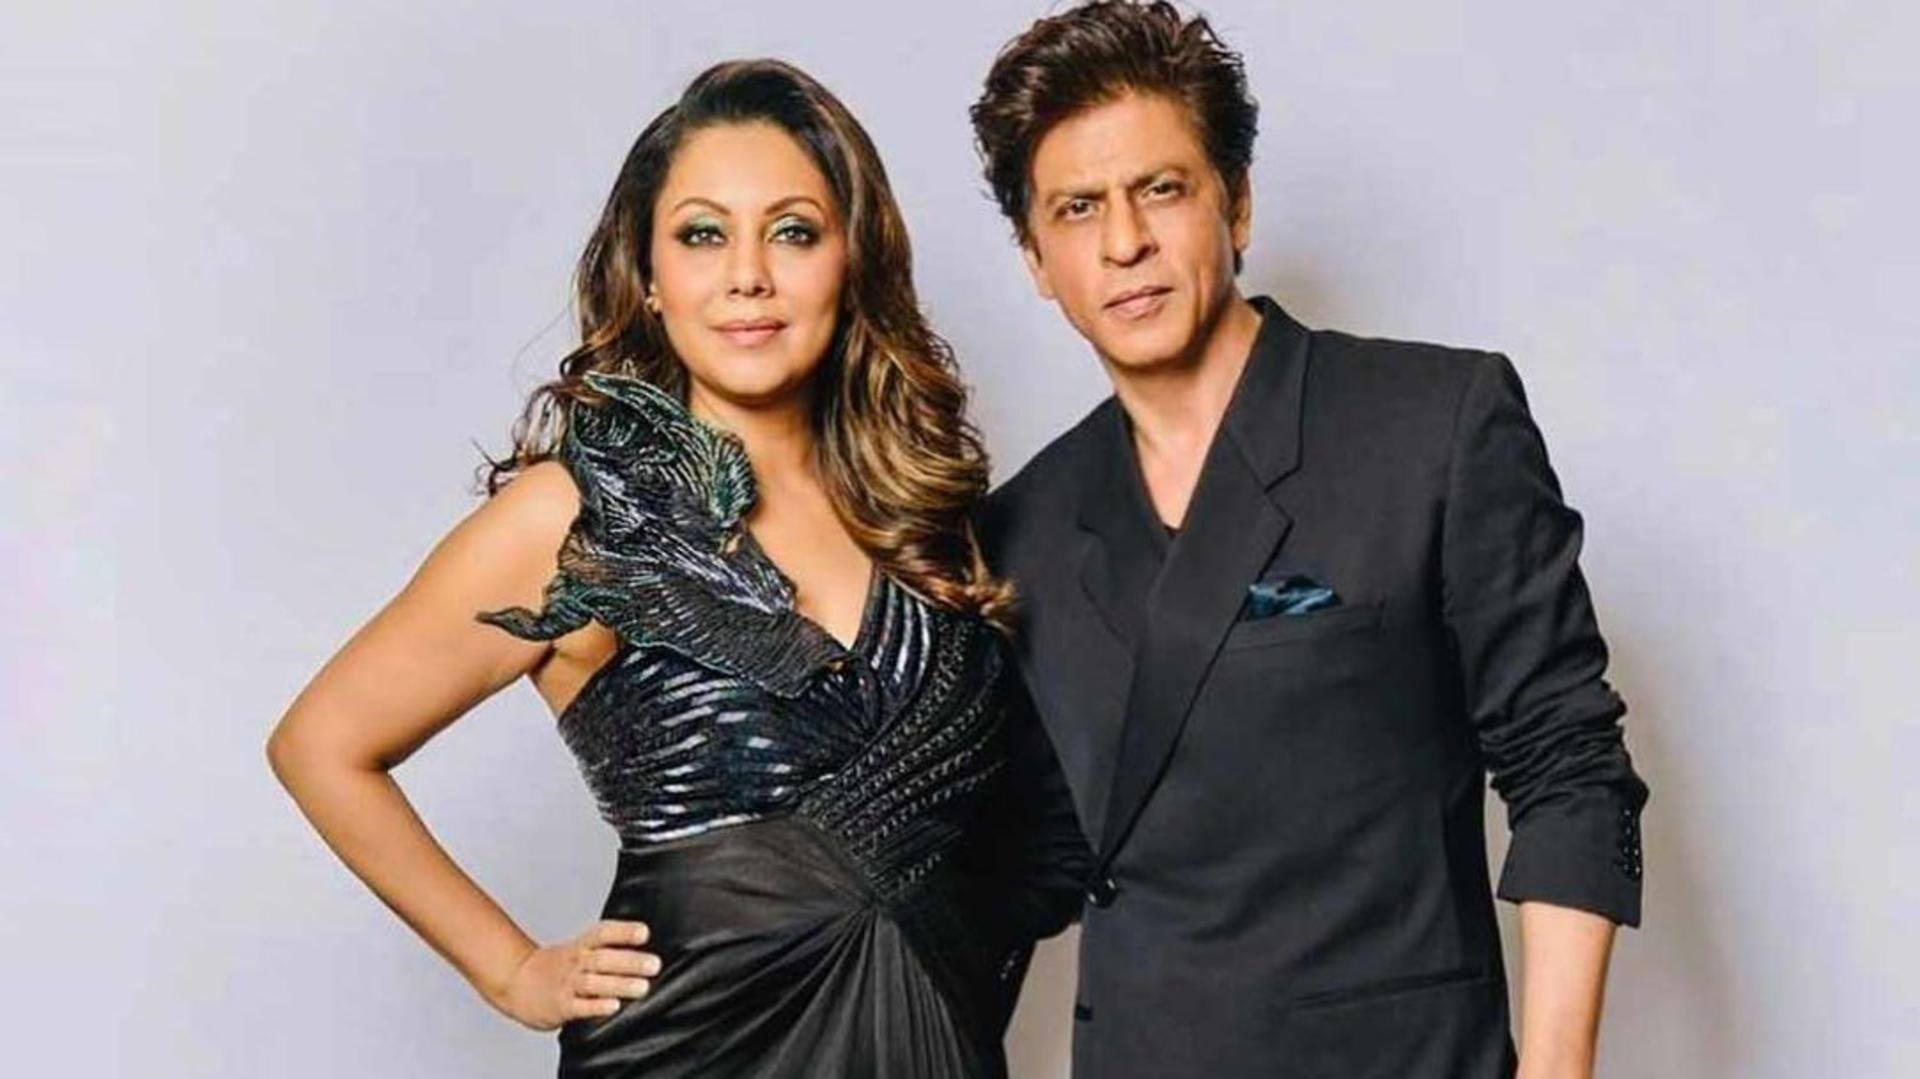 When Gauri rejected Shah Rukh's help for her business